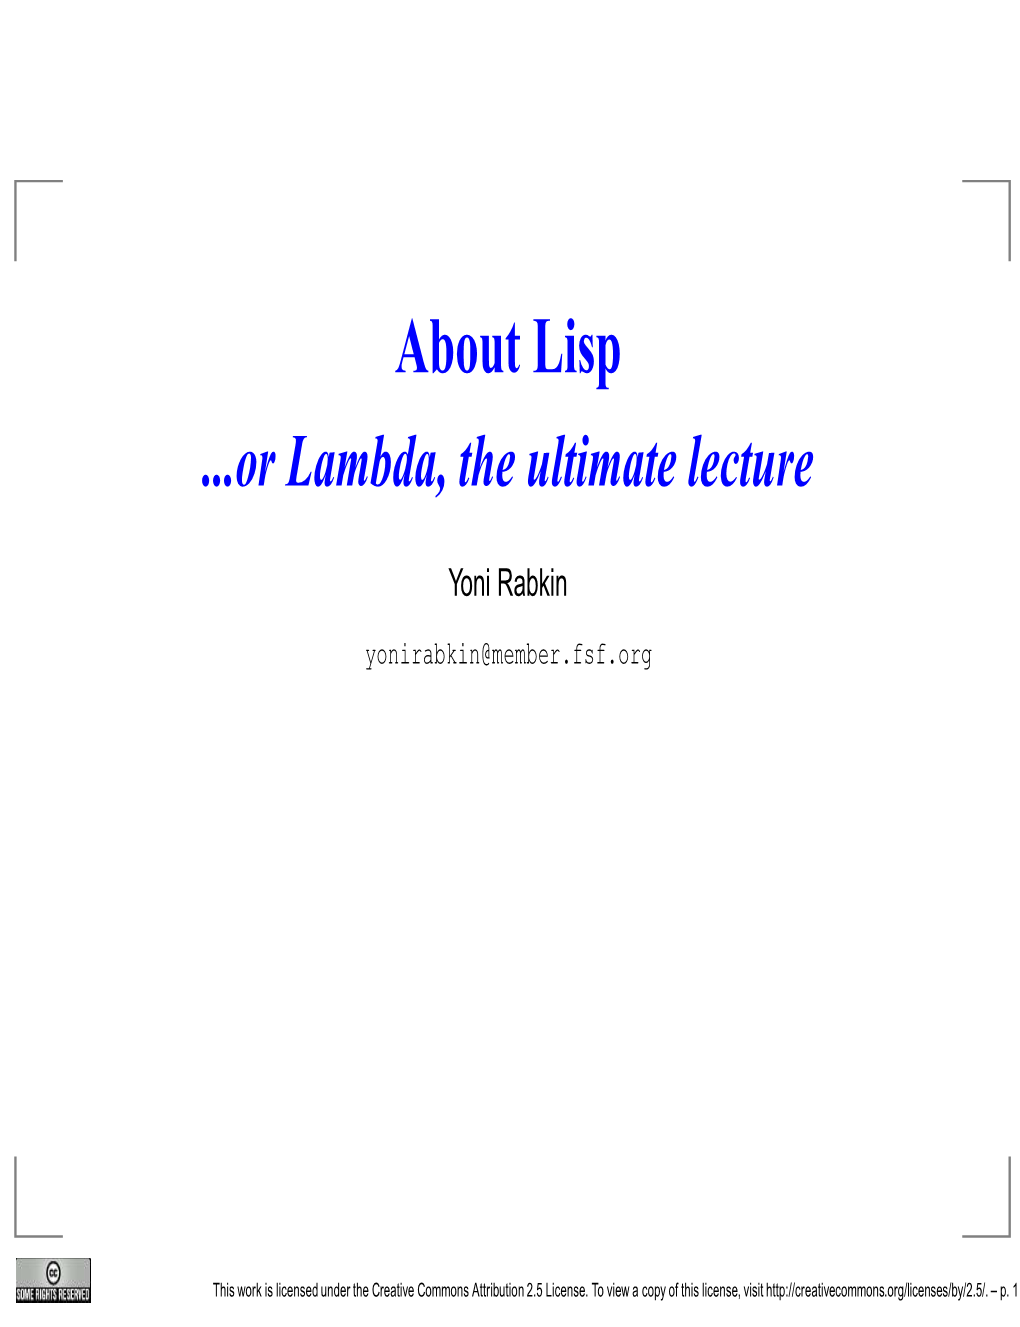 About Lisp ...Or Lambda, the Ultimate Lecture